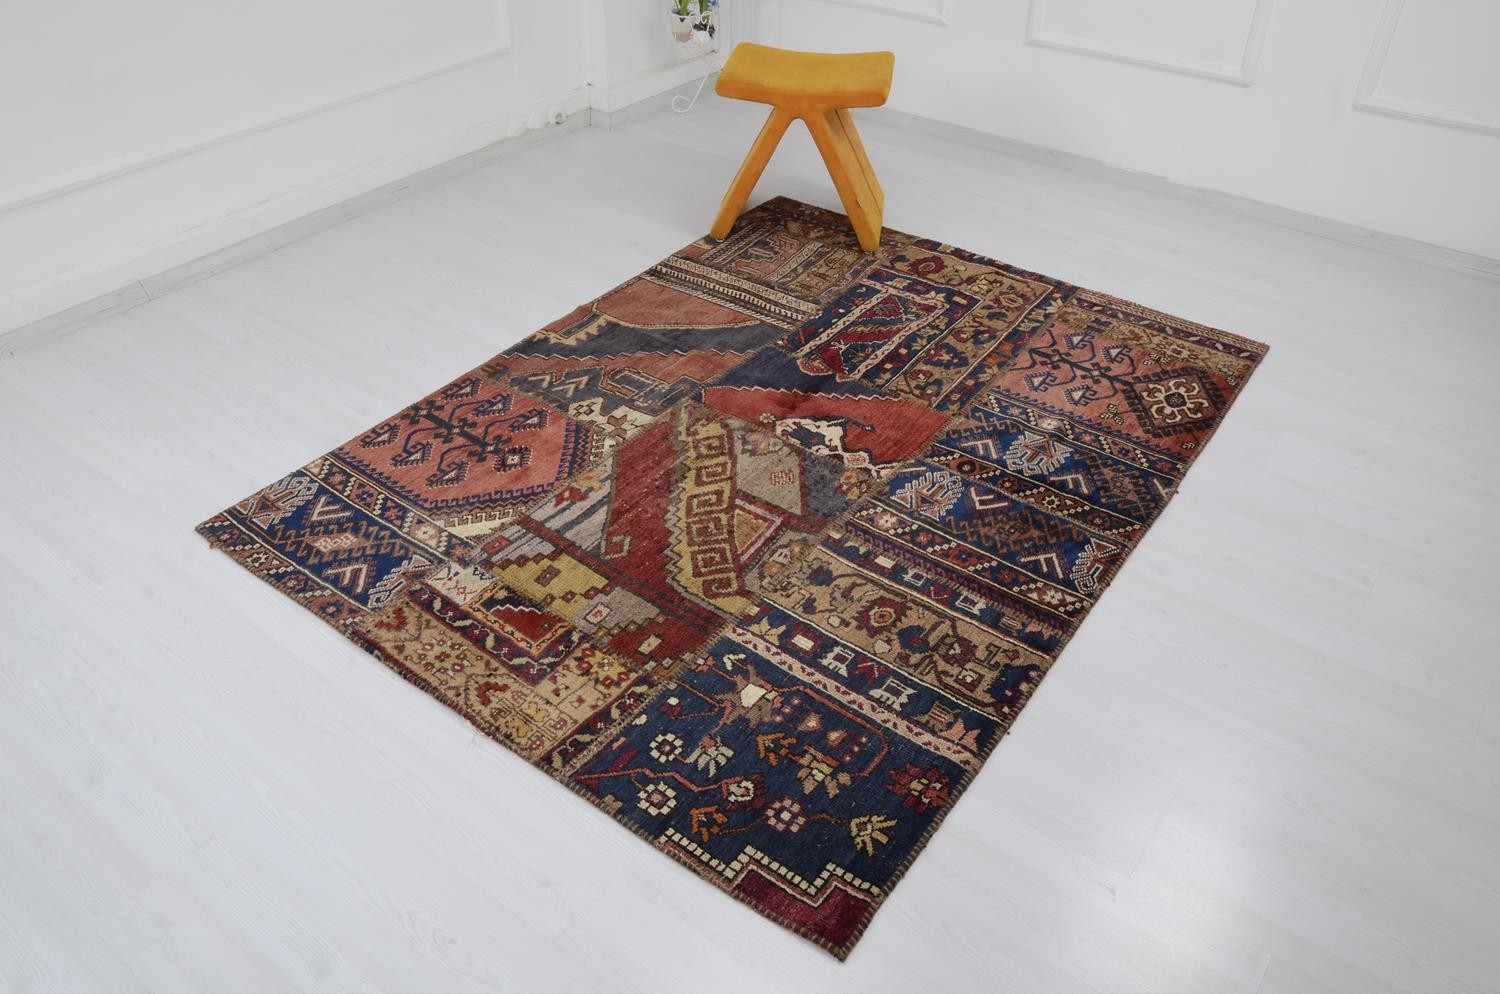 Why choose a luxury patchwork rug